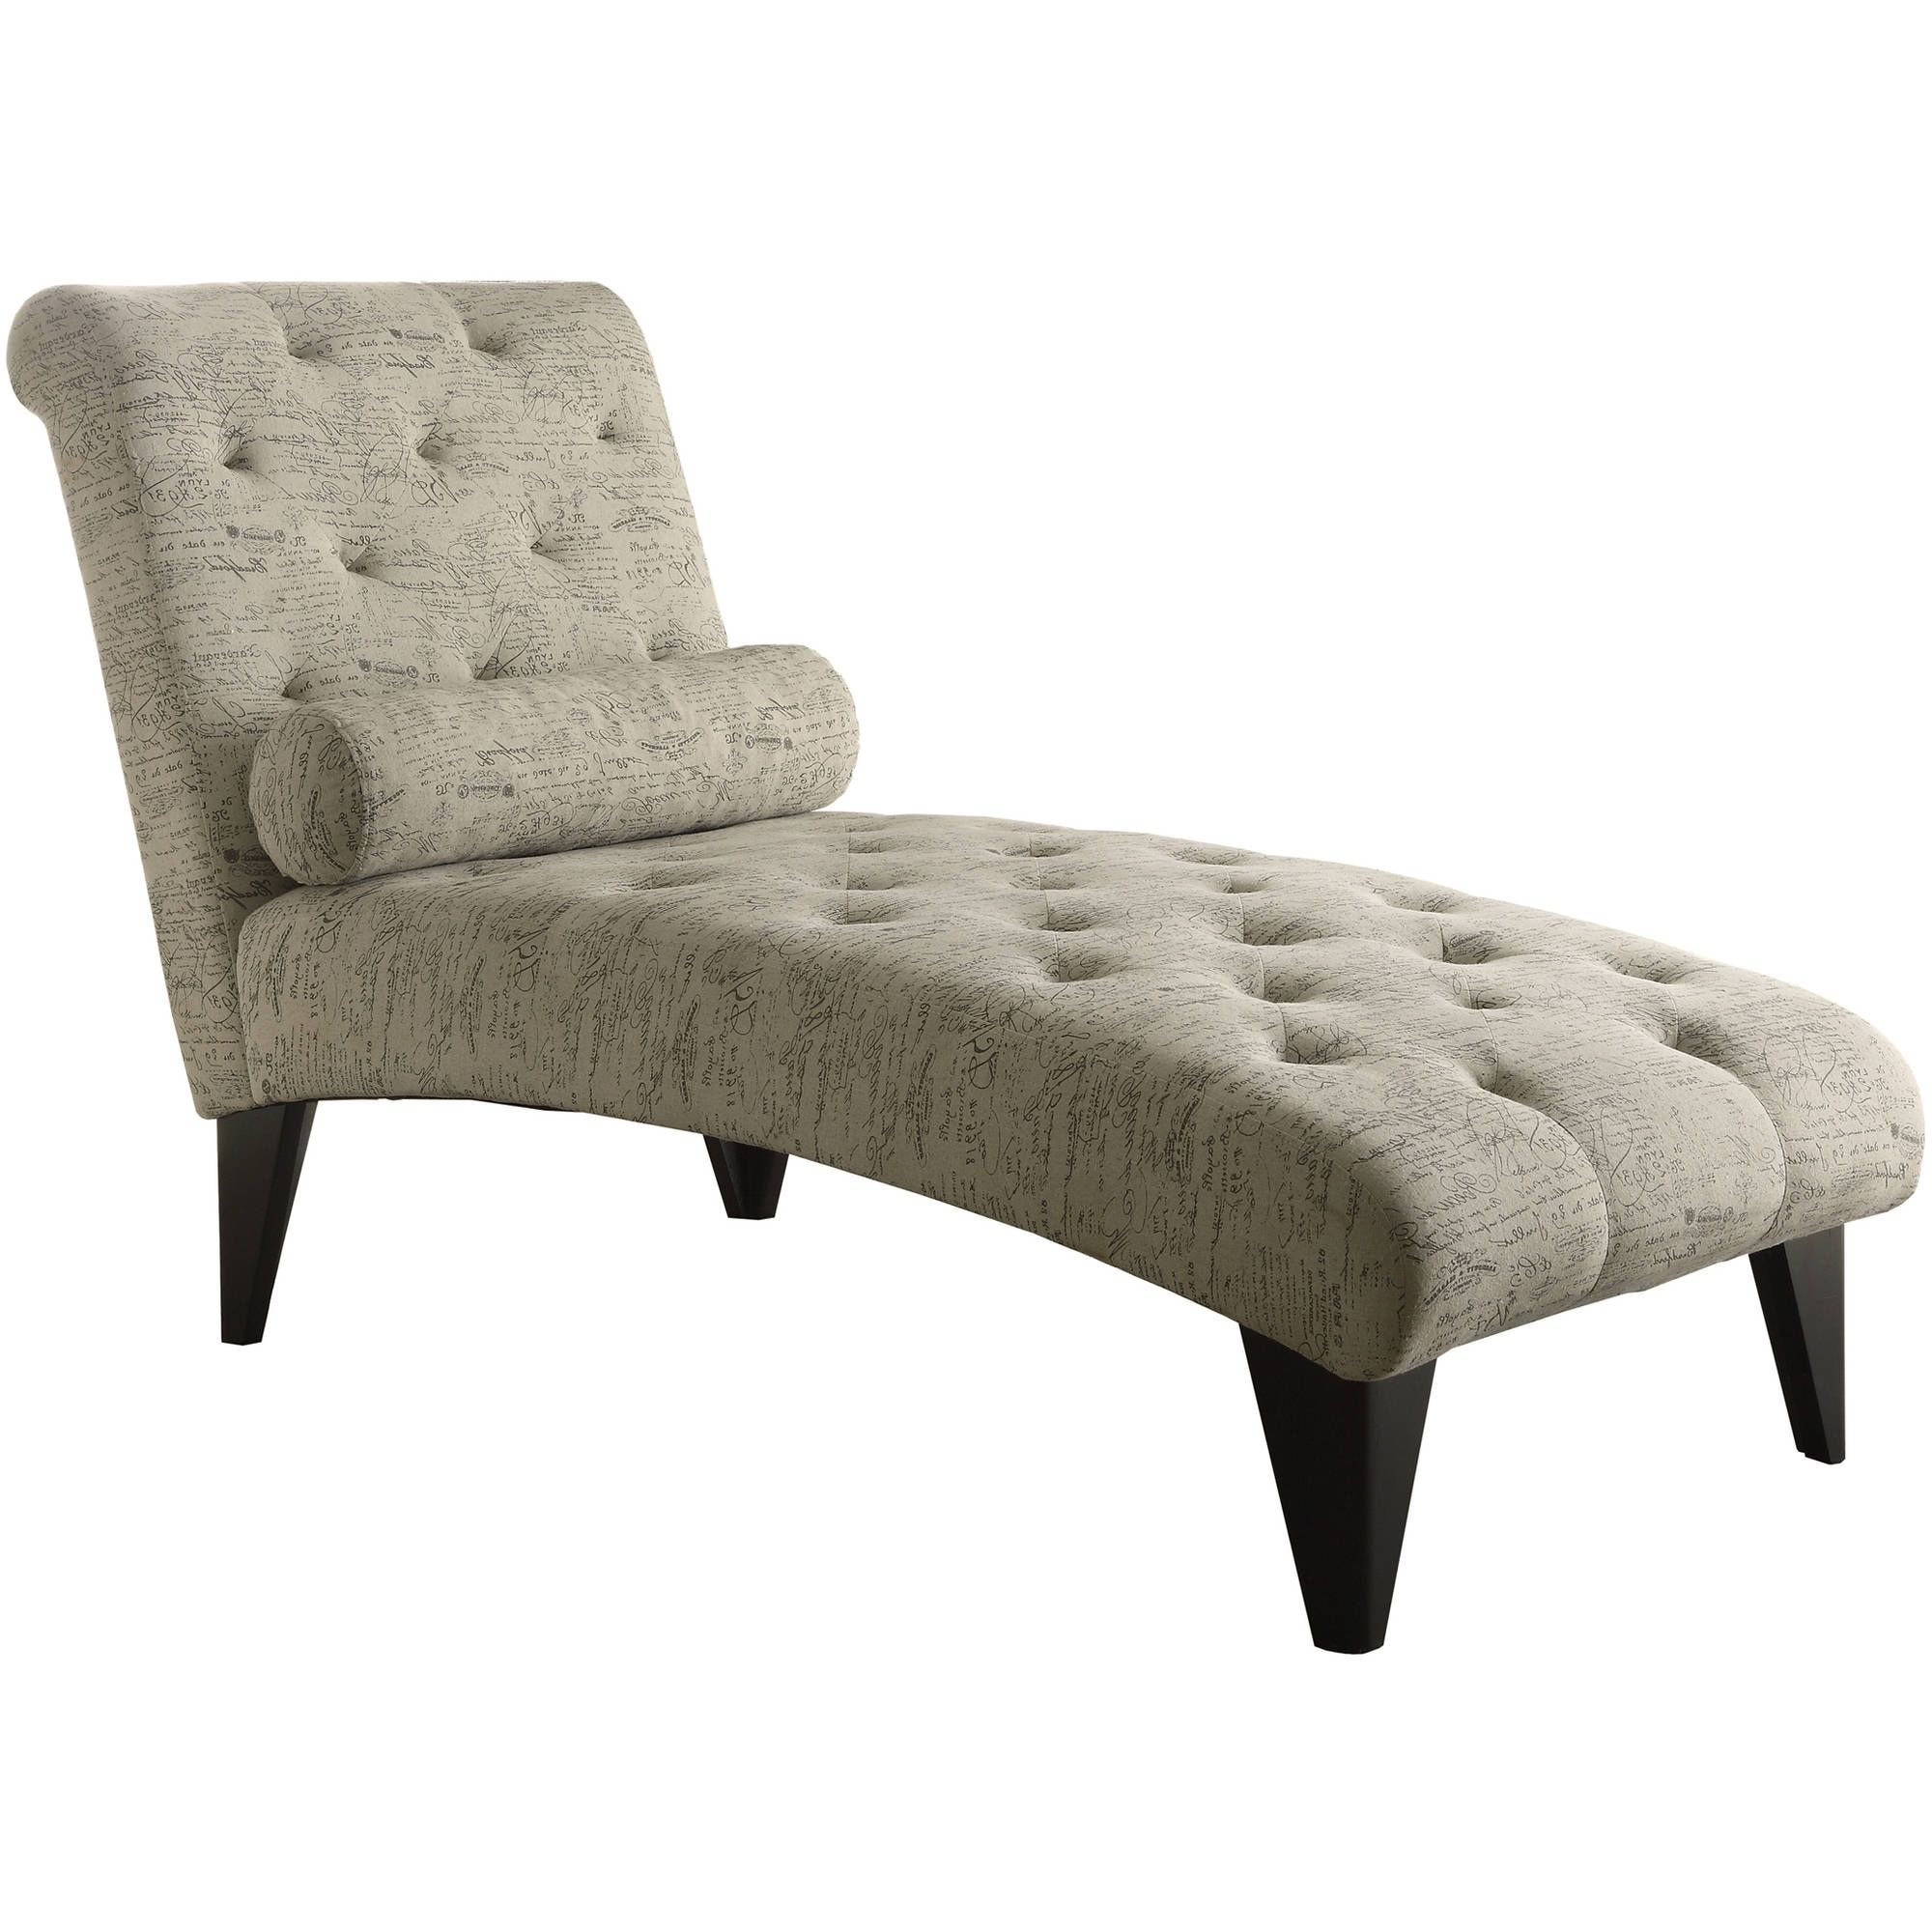 Latest Chaise Lounge Benchs Intended For Chaise Lounges – Walmart (View 4 of 15)